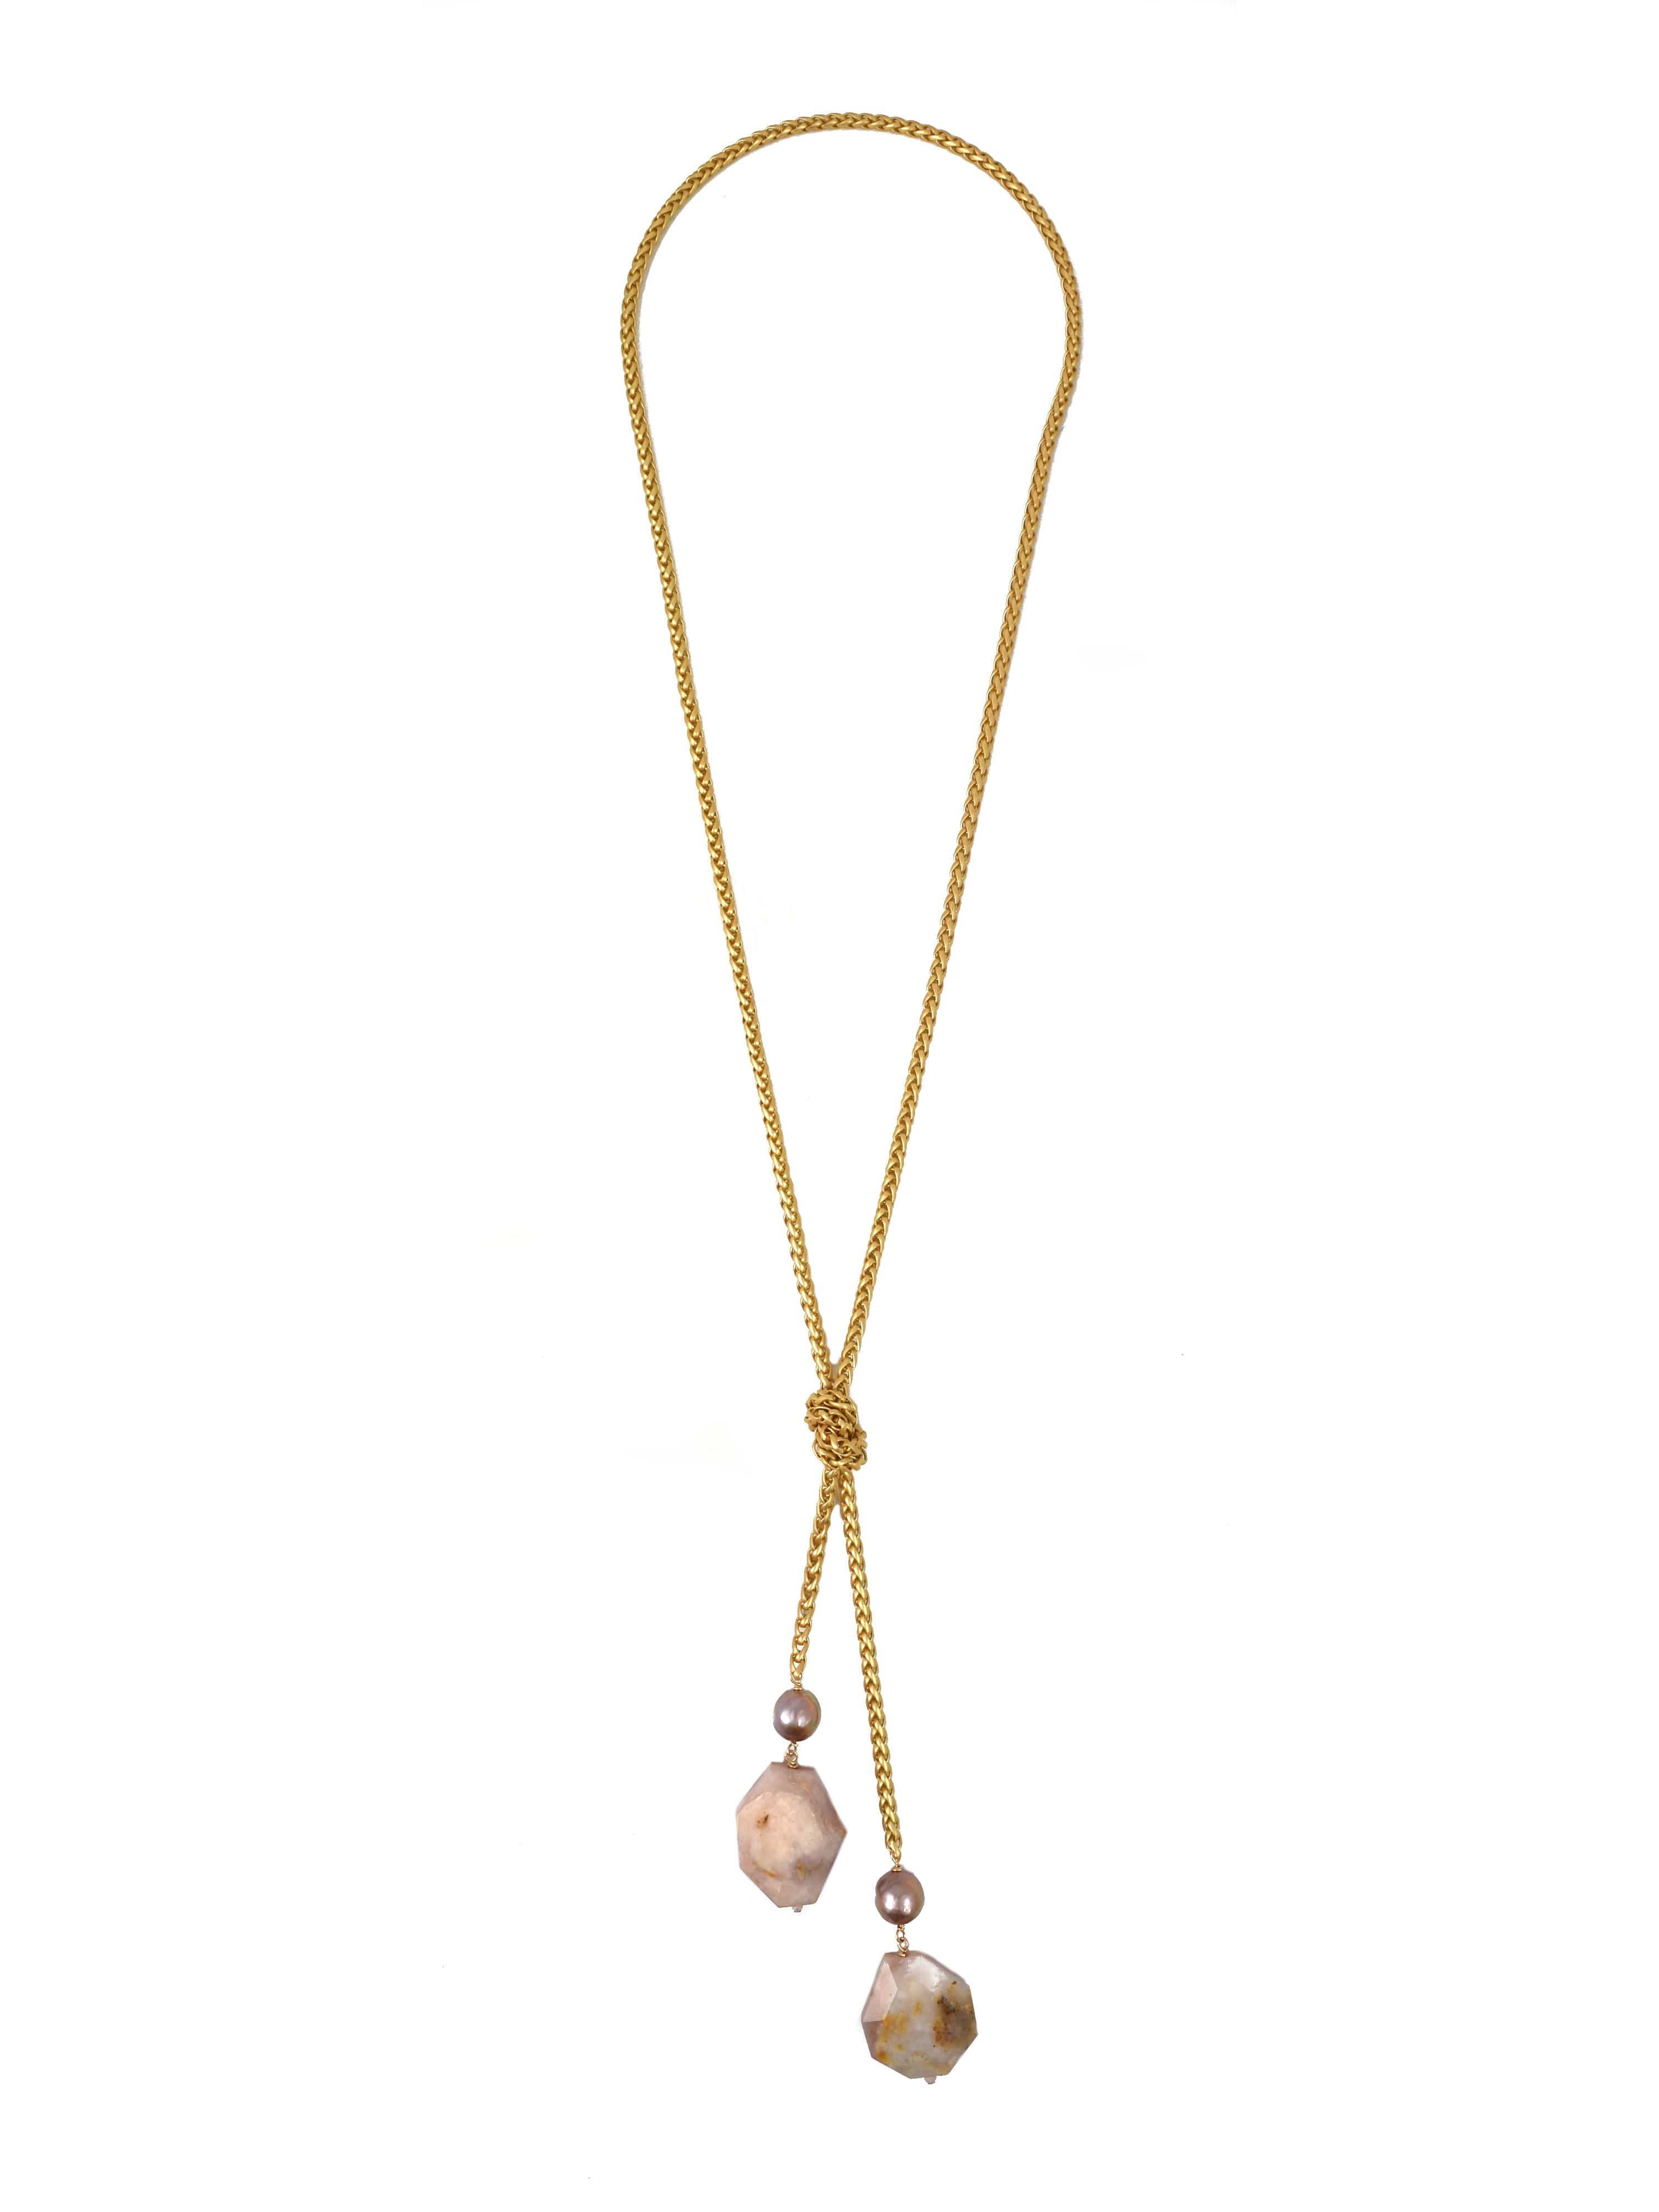 Pink Champagne Lariat Necklace